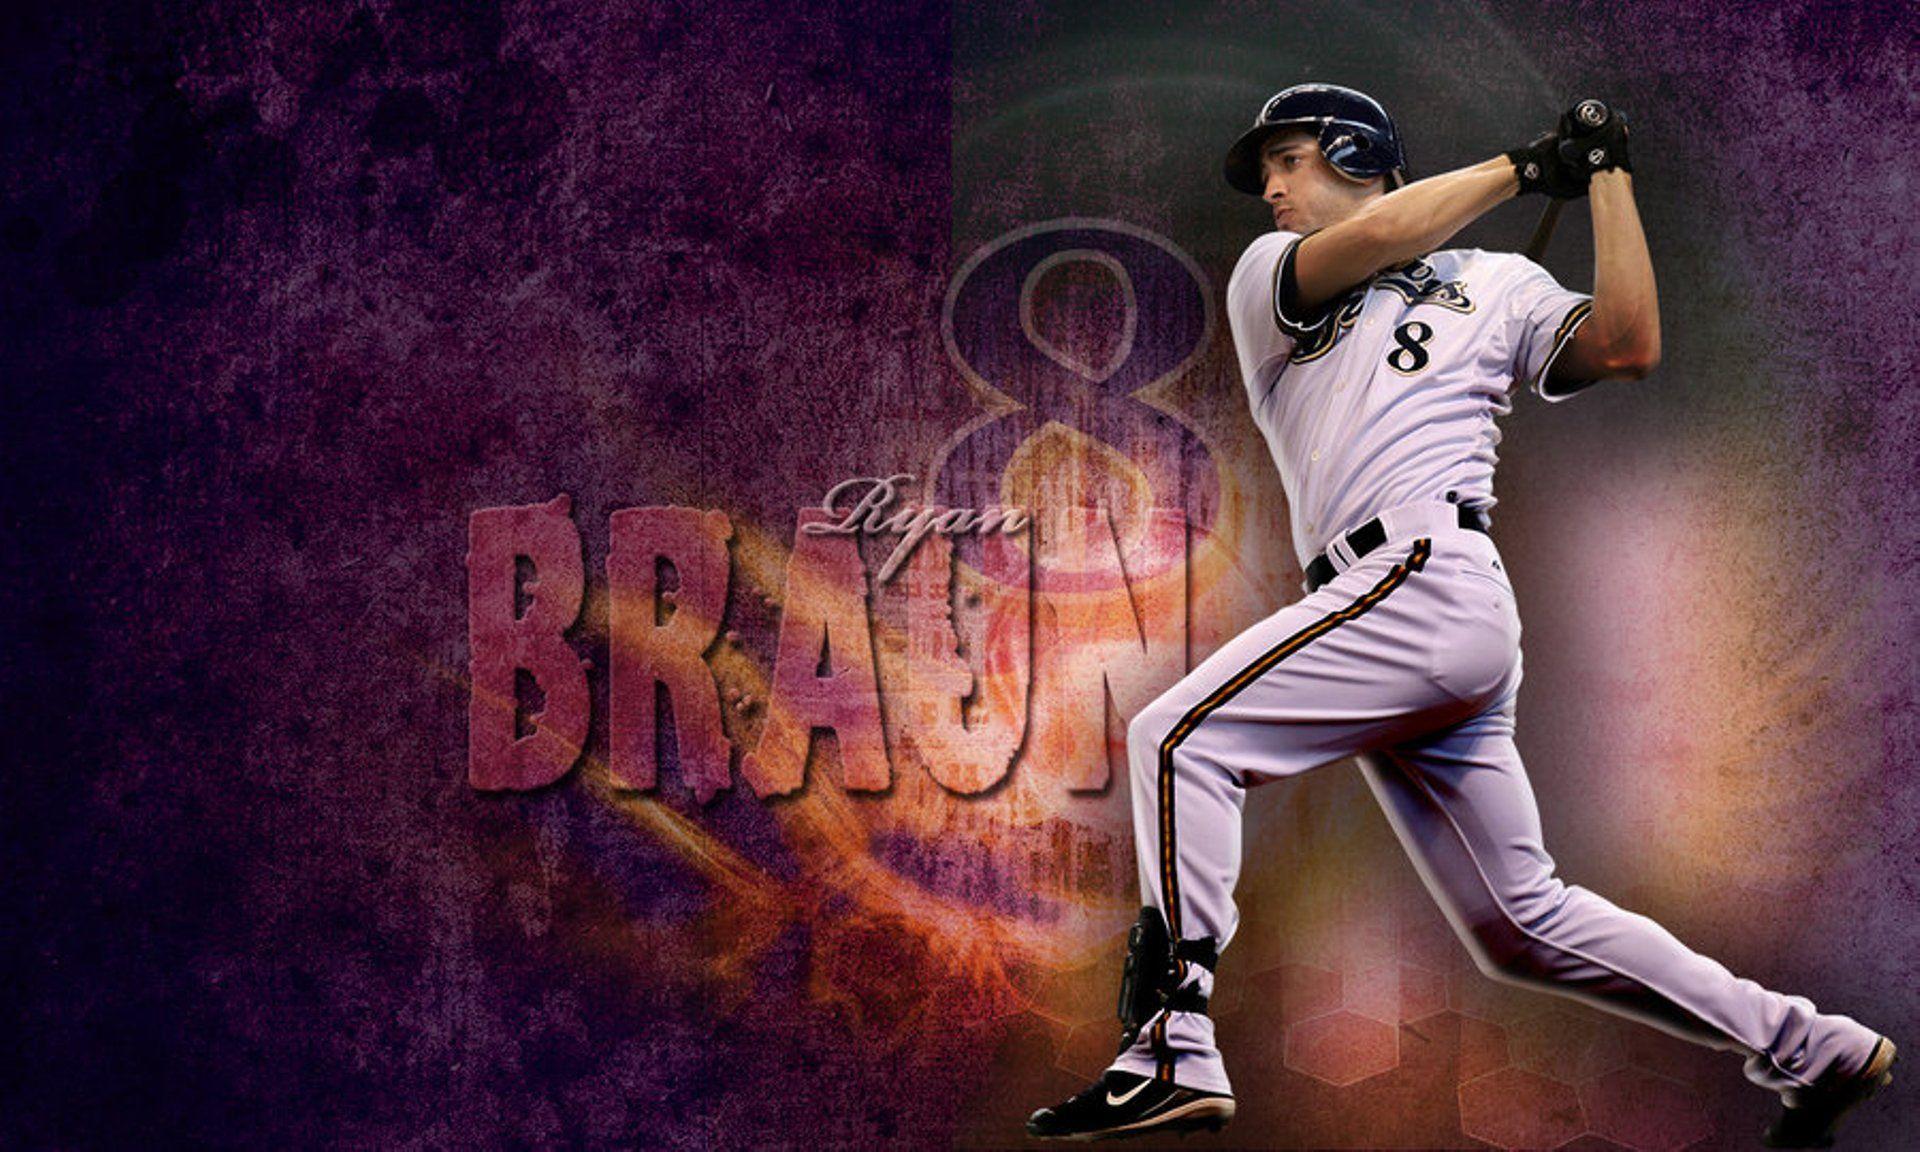 Brewers Background Free Download